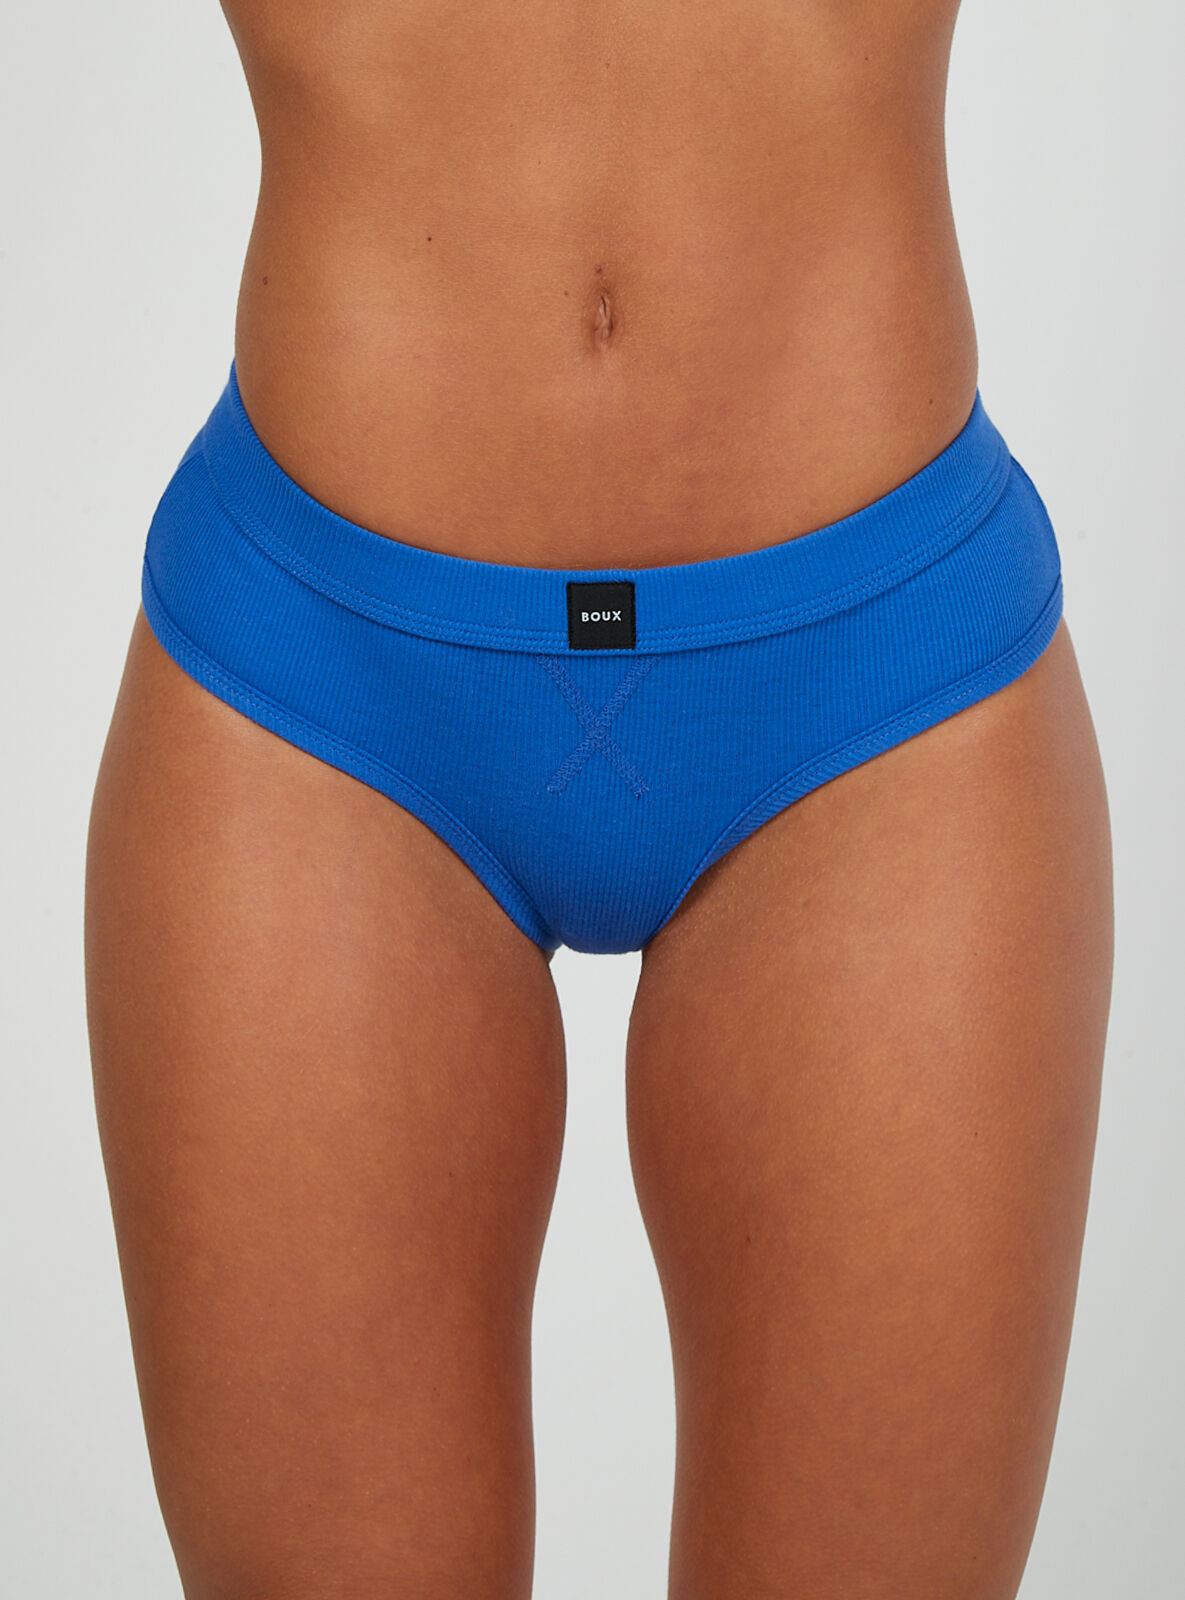 Boux Avenue Nell ribbed cheeky shorts - Cobalt Blue - 12